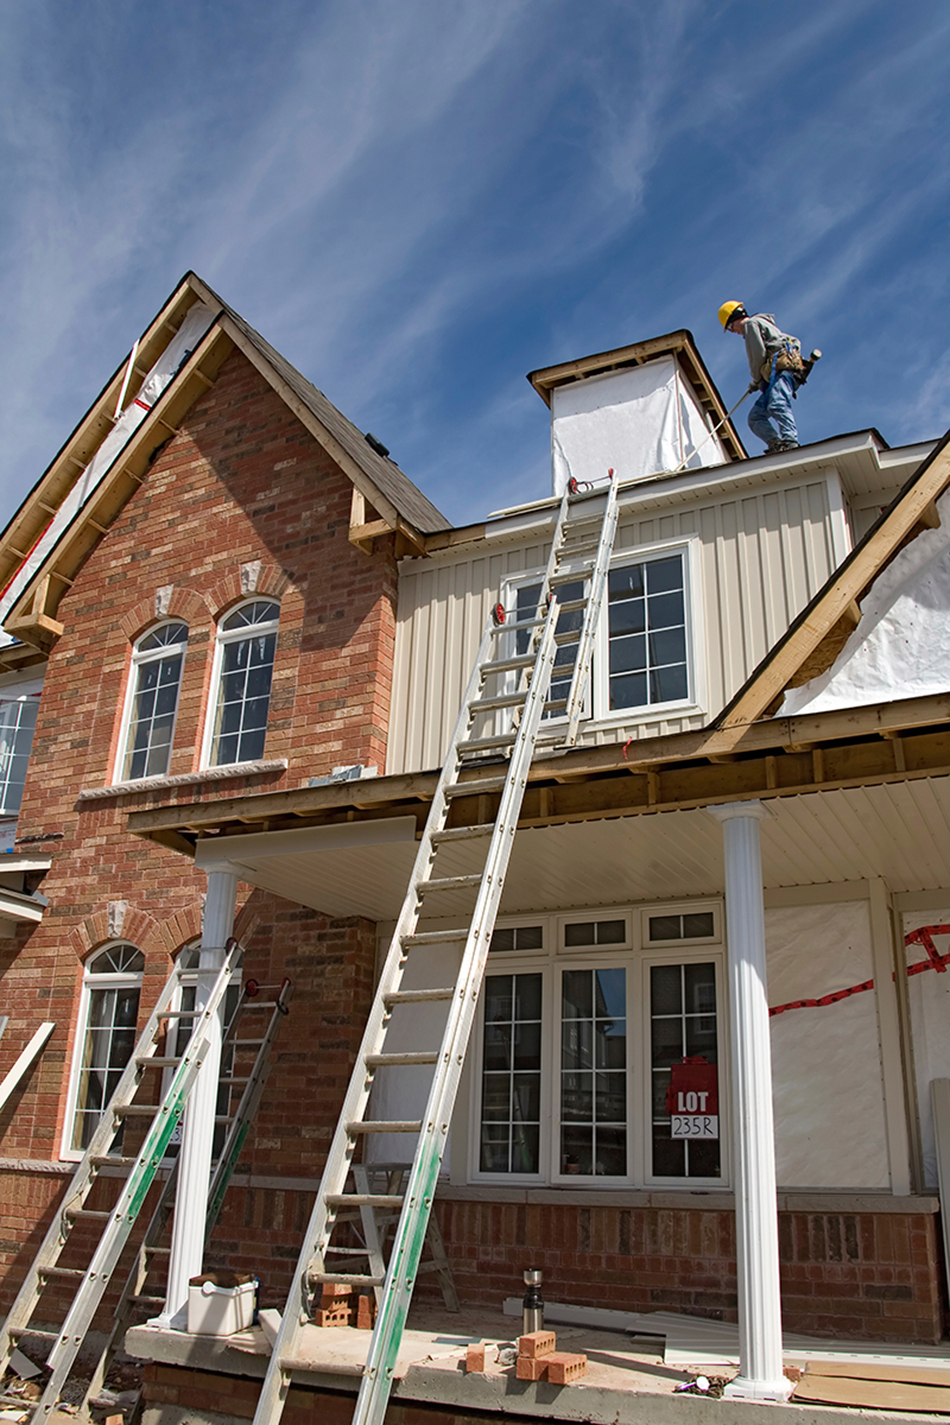 Workers on a roof redoing the siding and roof shingles